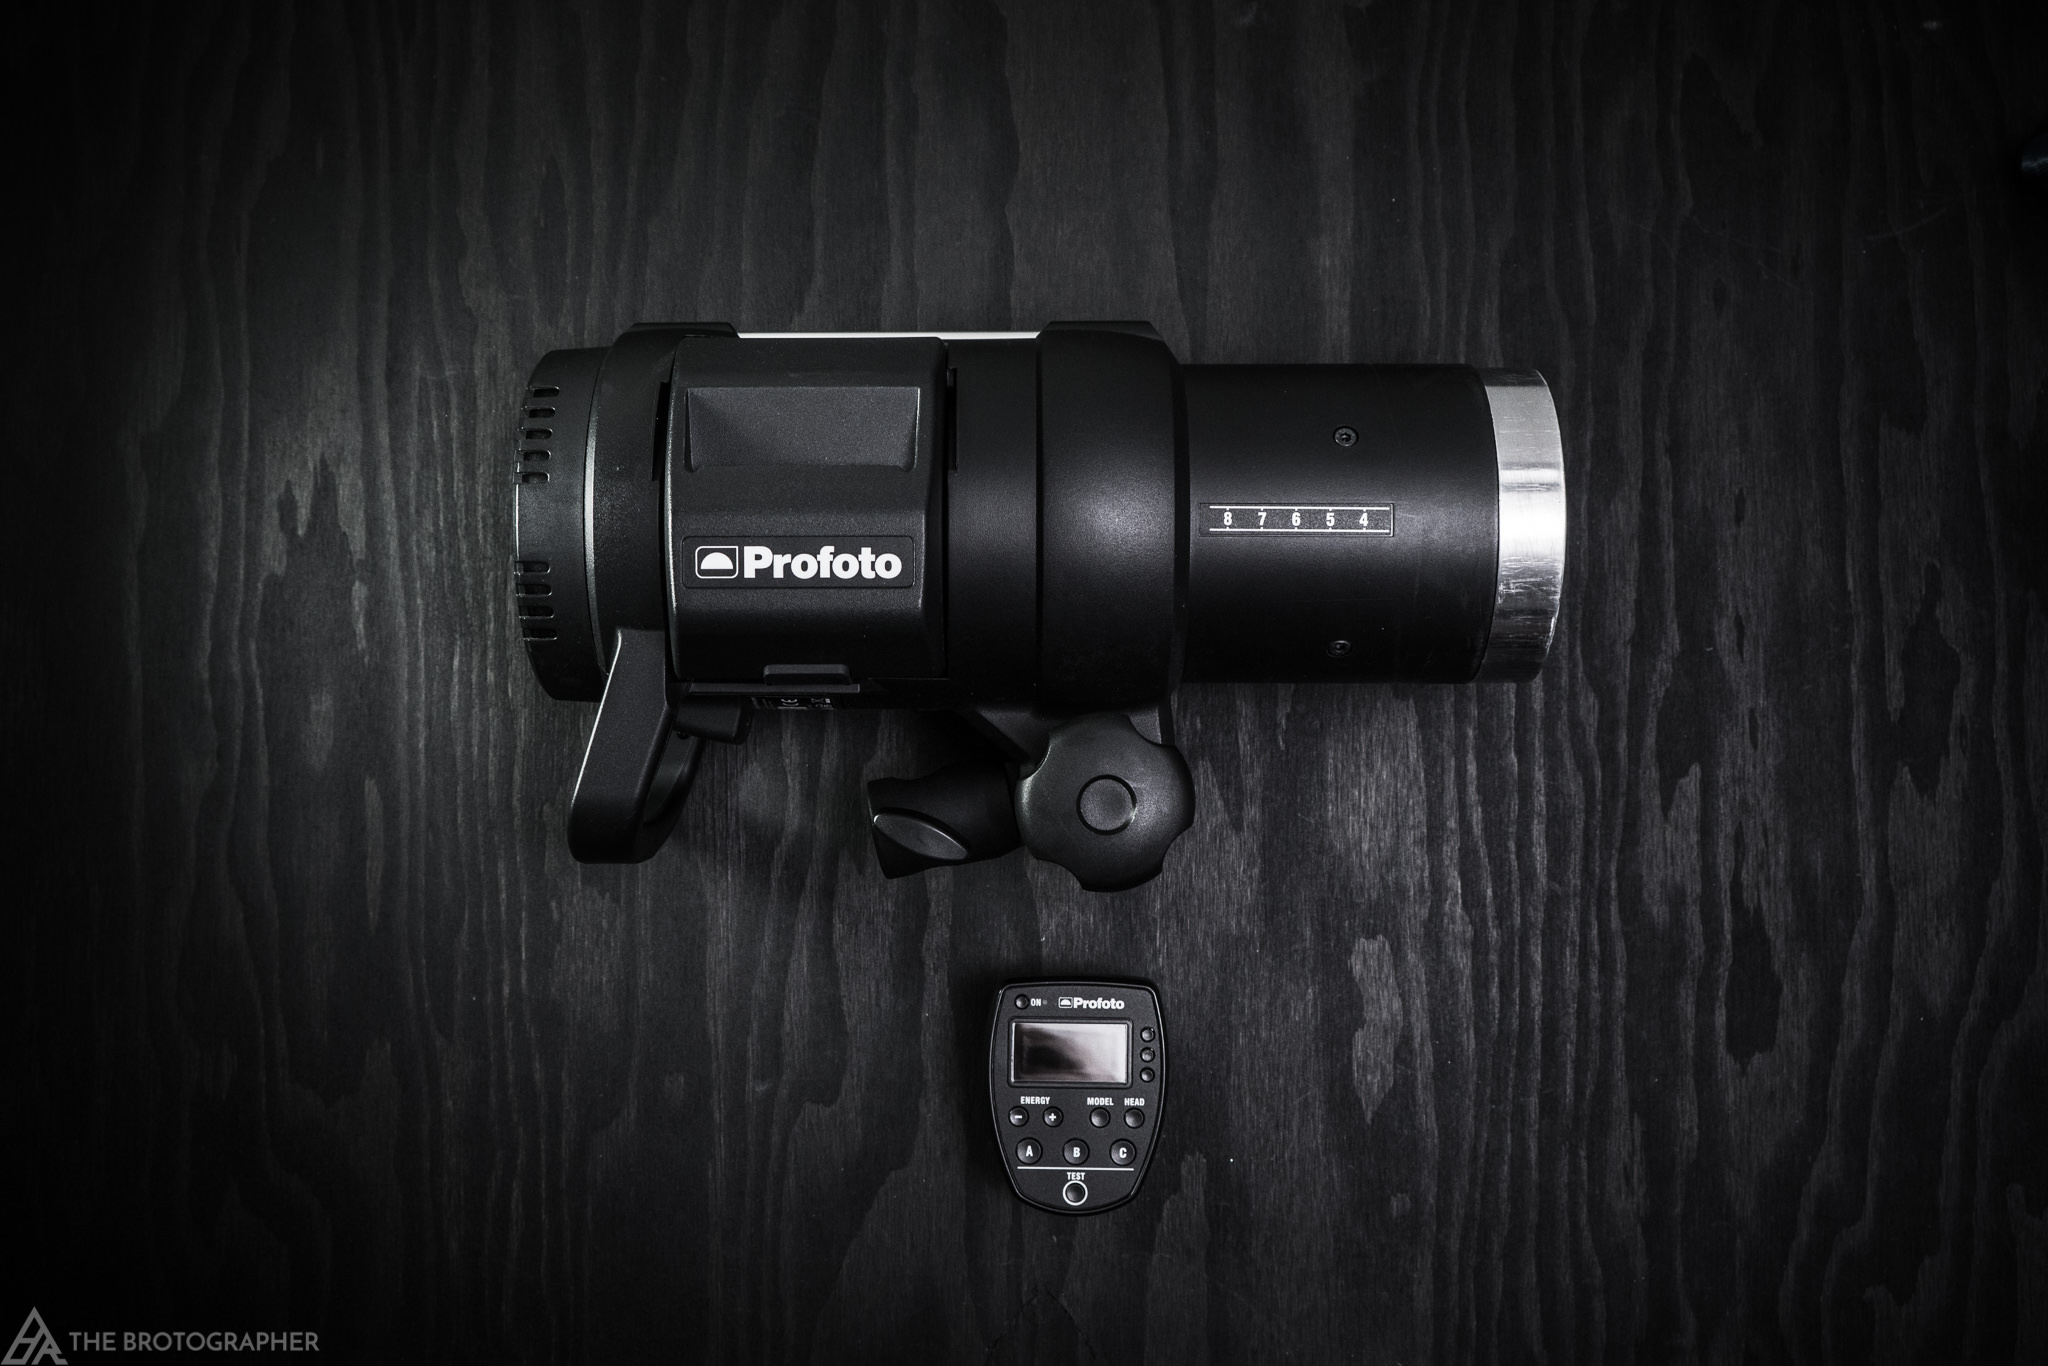 Profoto B1 500 WS Review - Still The King of Flash? - The Brotographer